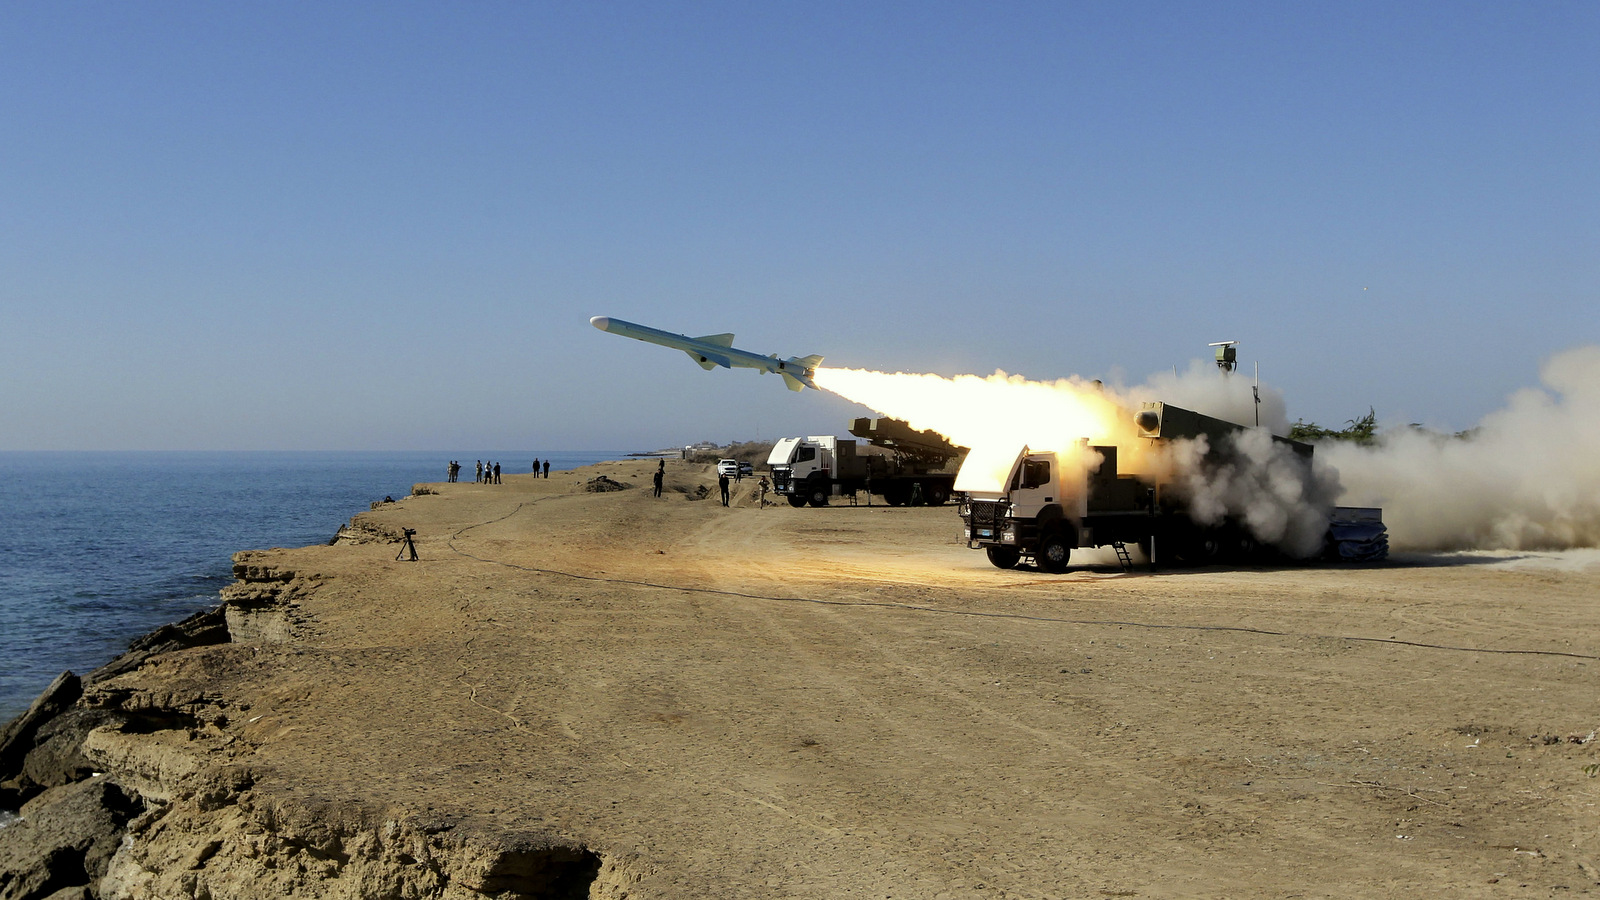 A Ghader test missile is launched from the area near the Iranian port of Jask port on the shore of the Oman Sea during an Iranian navy drill, Tuesday, Jan. 1, 2013. (AP/Jamejam Online, Azin Haghighi)